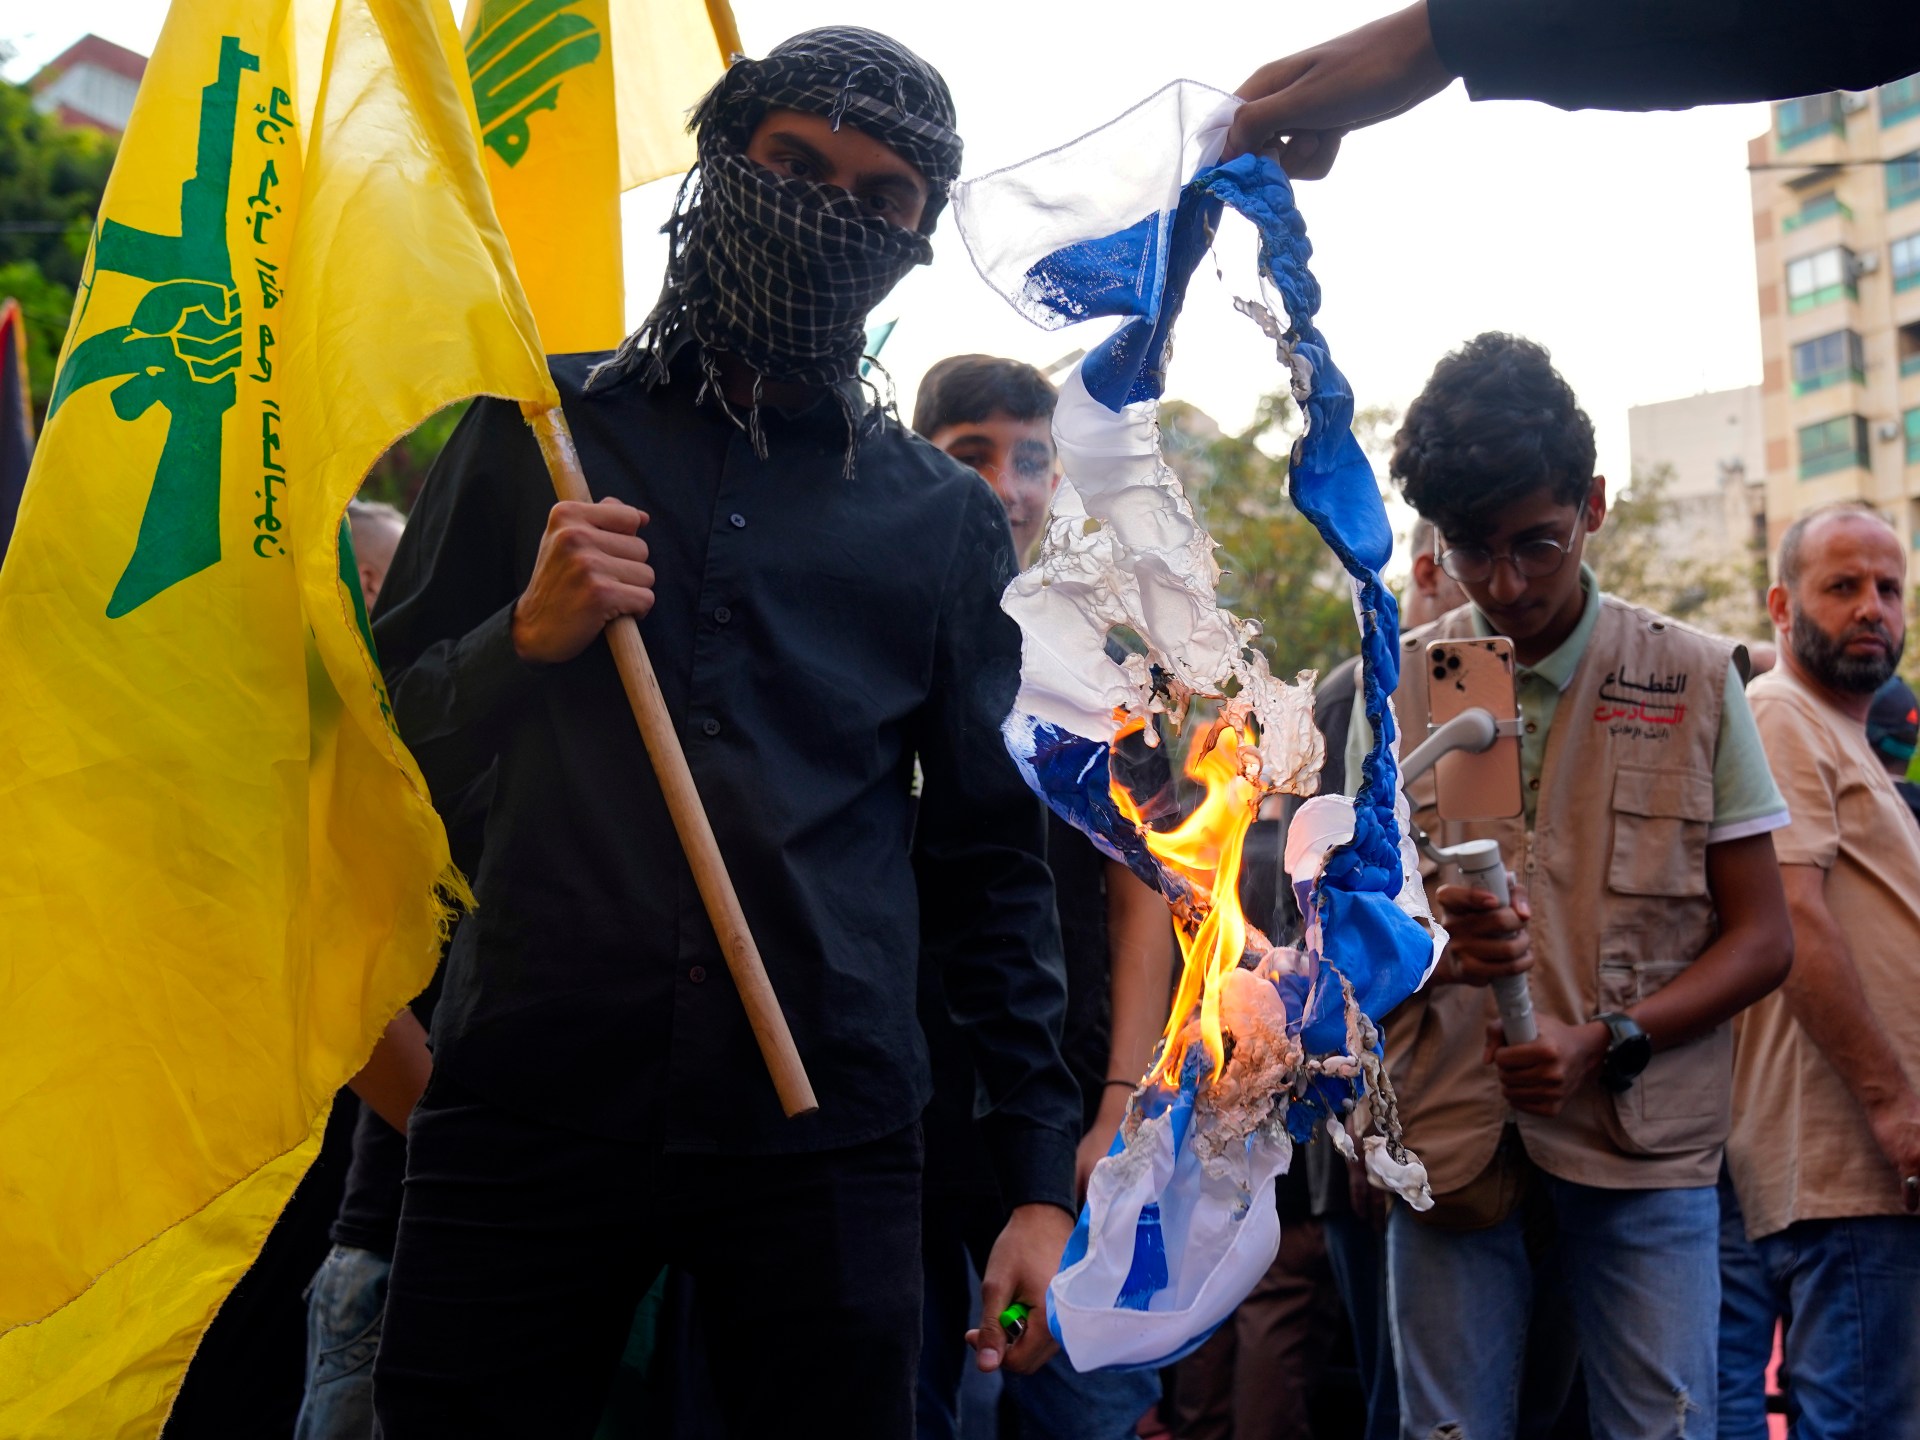 Analysis: It’s a win-win for Hezbollah against Israel so far